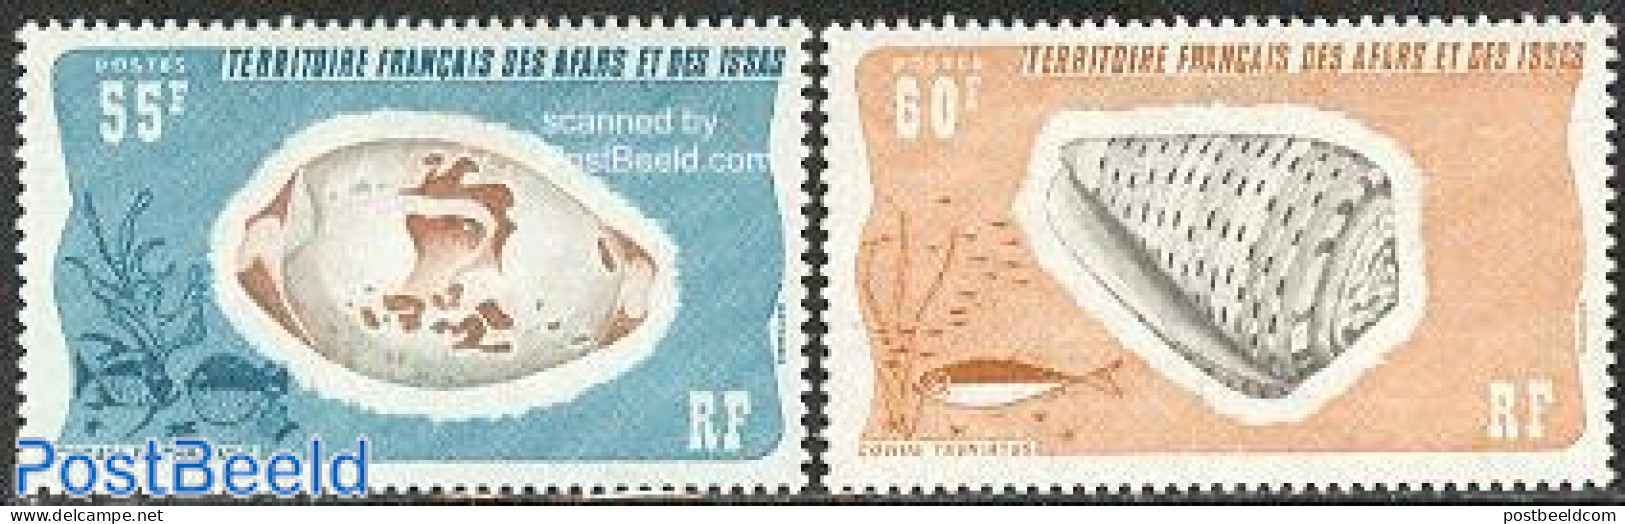 Afars And Issas 1976 Shells 2v, Mint NH, Nature - Fish - Shells & Crustaceans - Unused Stamps